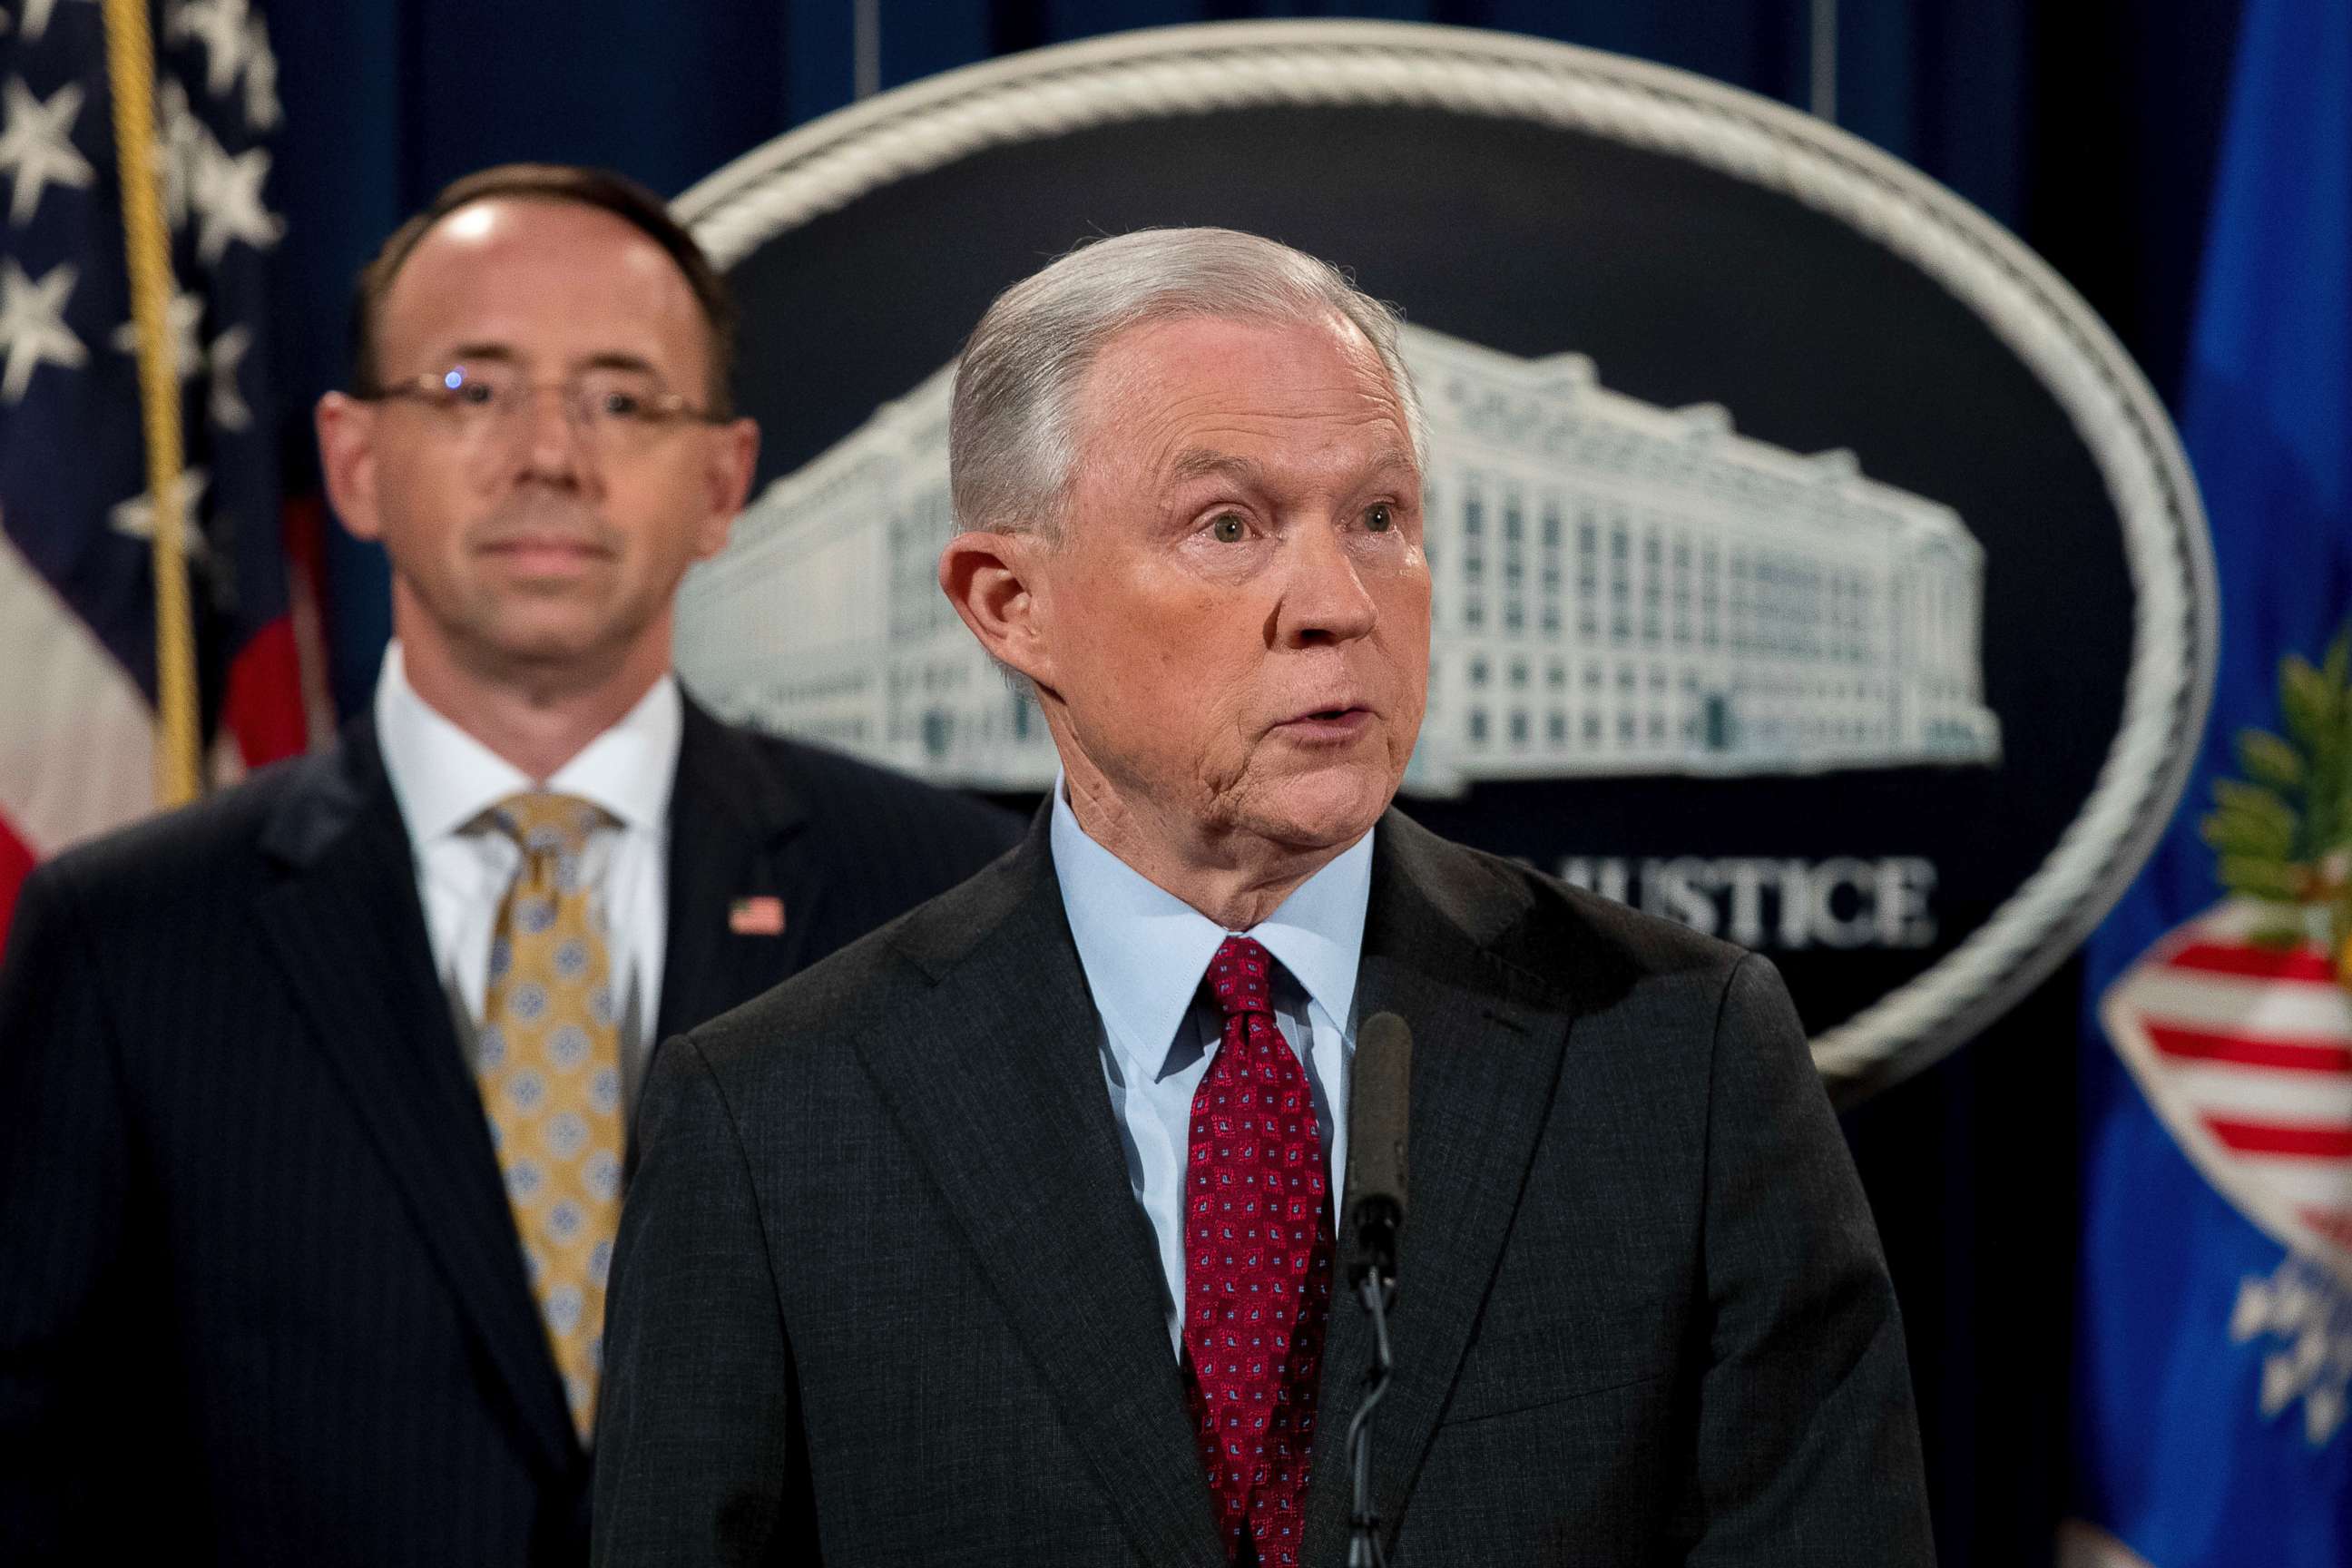 PHOTO: Attorney General Jeff Sessions accompanied by Deputy Attorney General Rod Rosenstein, left, speaks at a news conference at the Department of Justice, July 20, 2017, in Washington D.C.